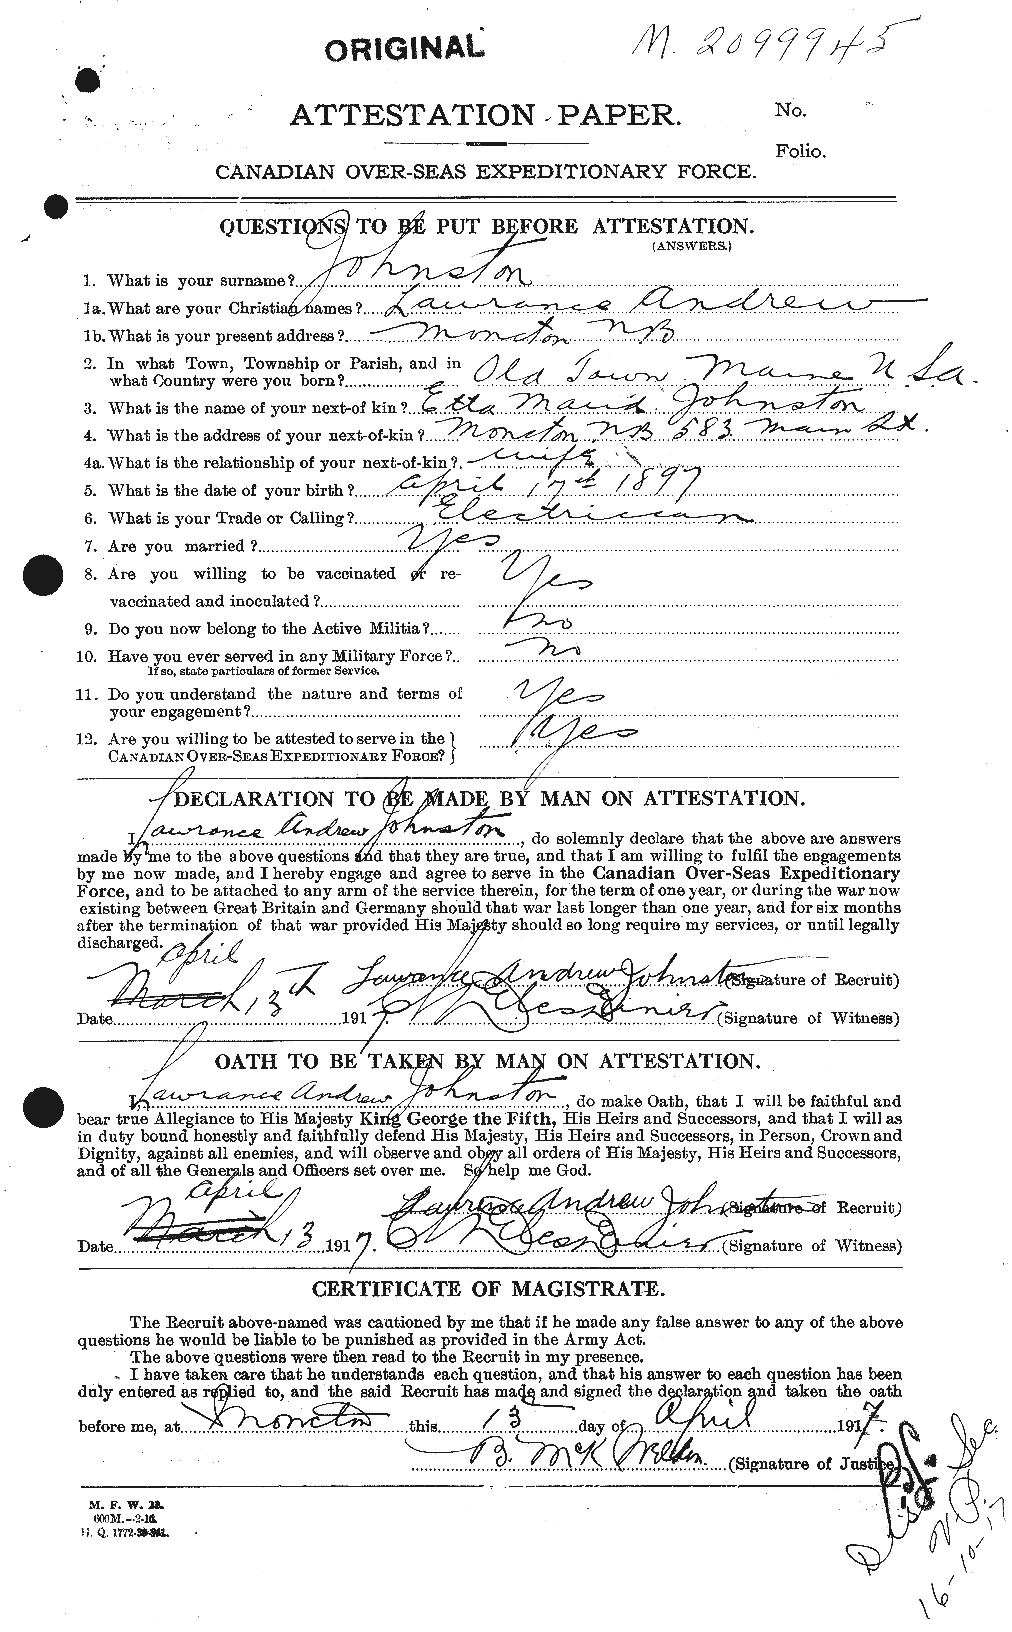 Personnel Records of the First World War - CEF 422933a